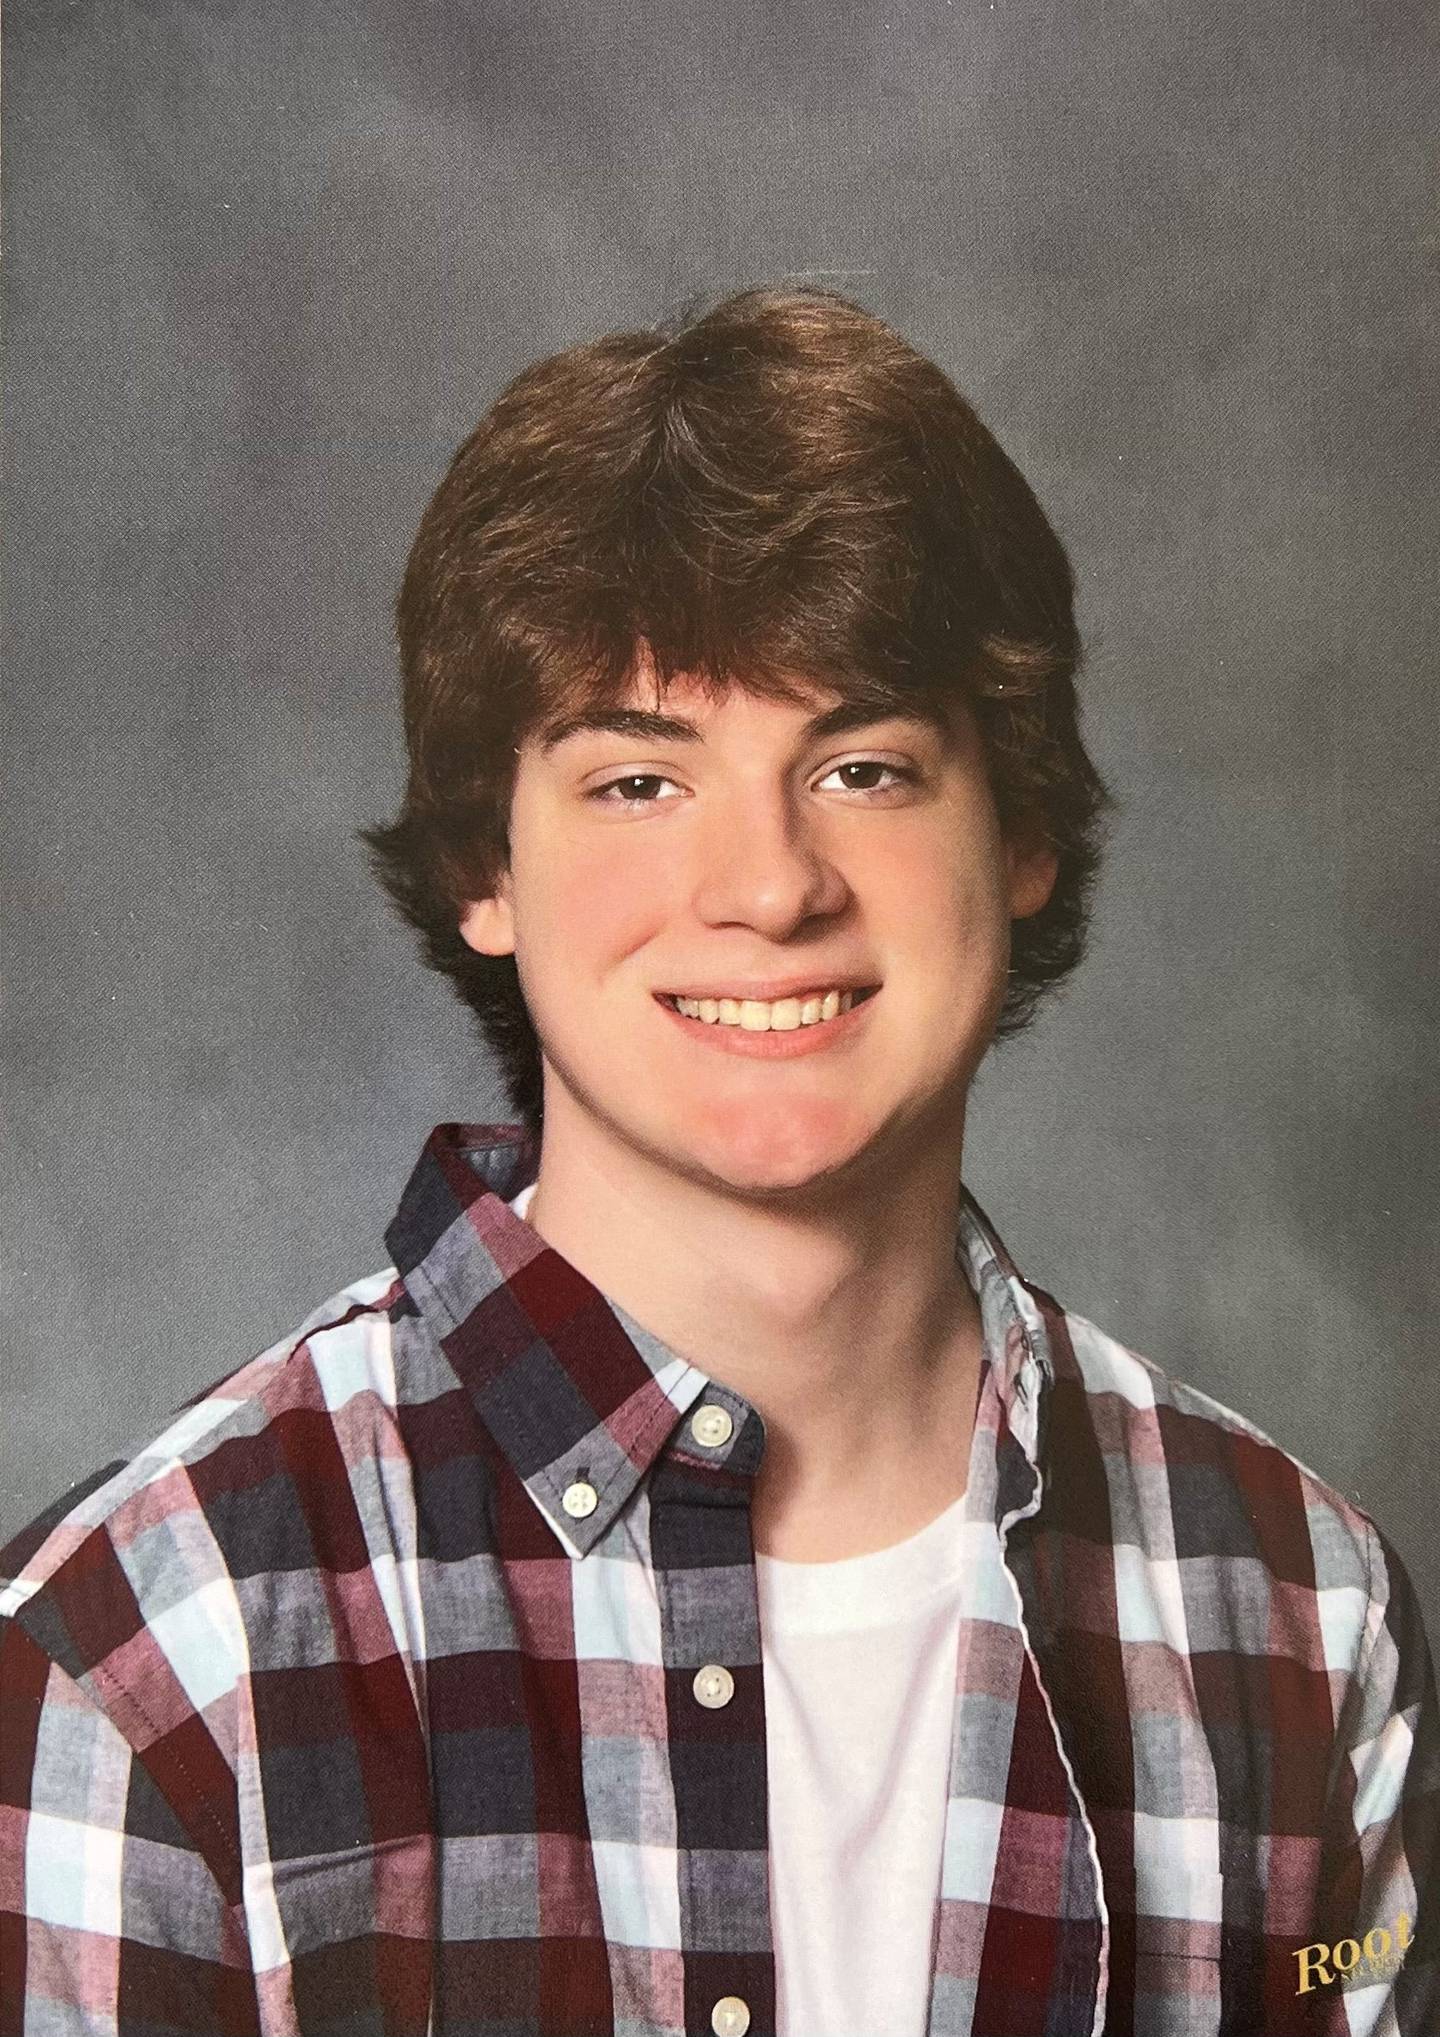 Batavia senior Corey Berg was awarded the Inspiring Entrepreneurship award. This scholarship is to reward a student who has interest in starting a business to encourage consideration to locate in Batavia someday.